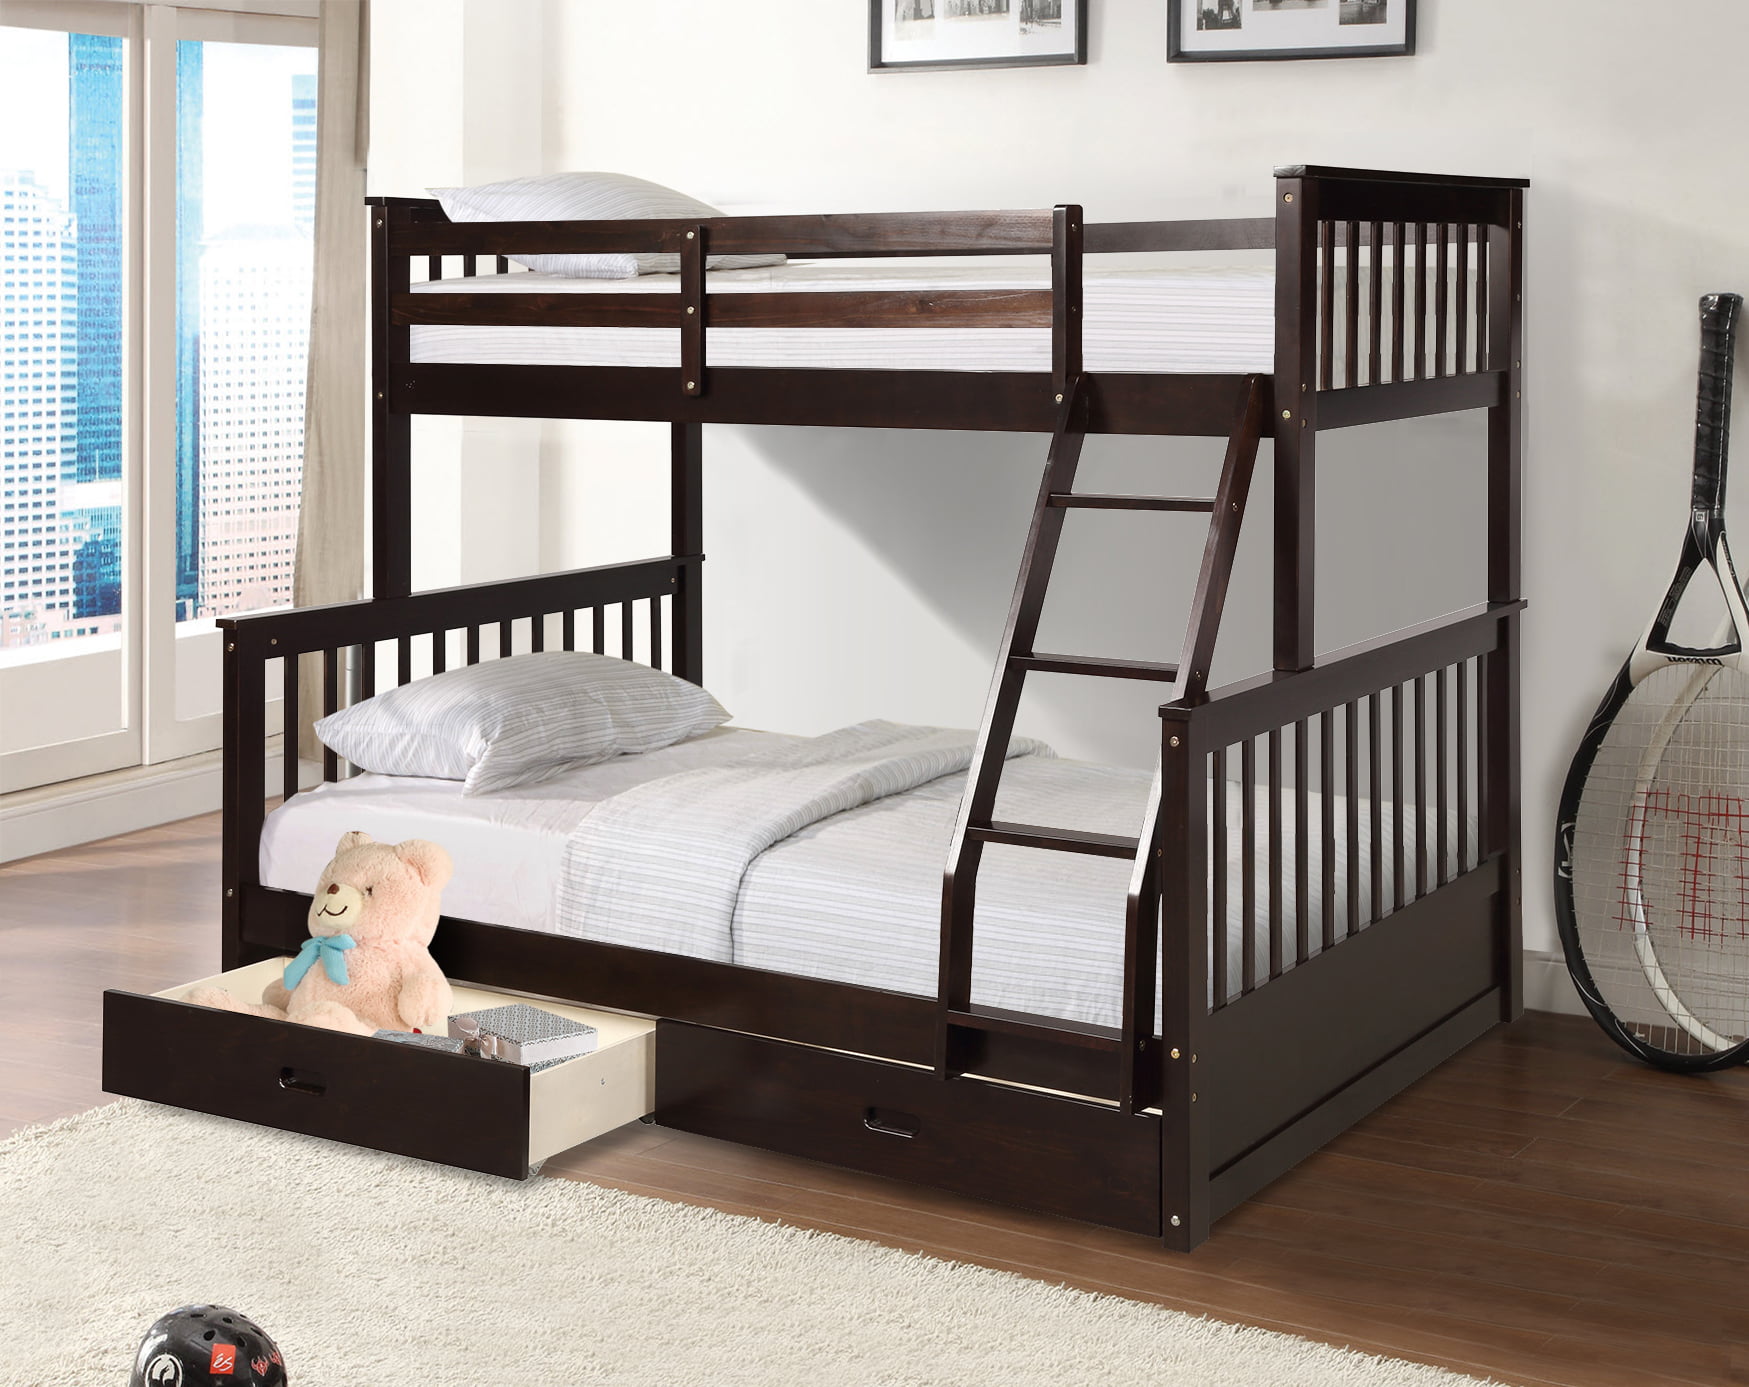 Details about   Modern Mission Bunk Beds with Storage 